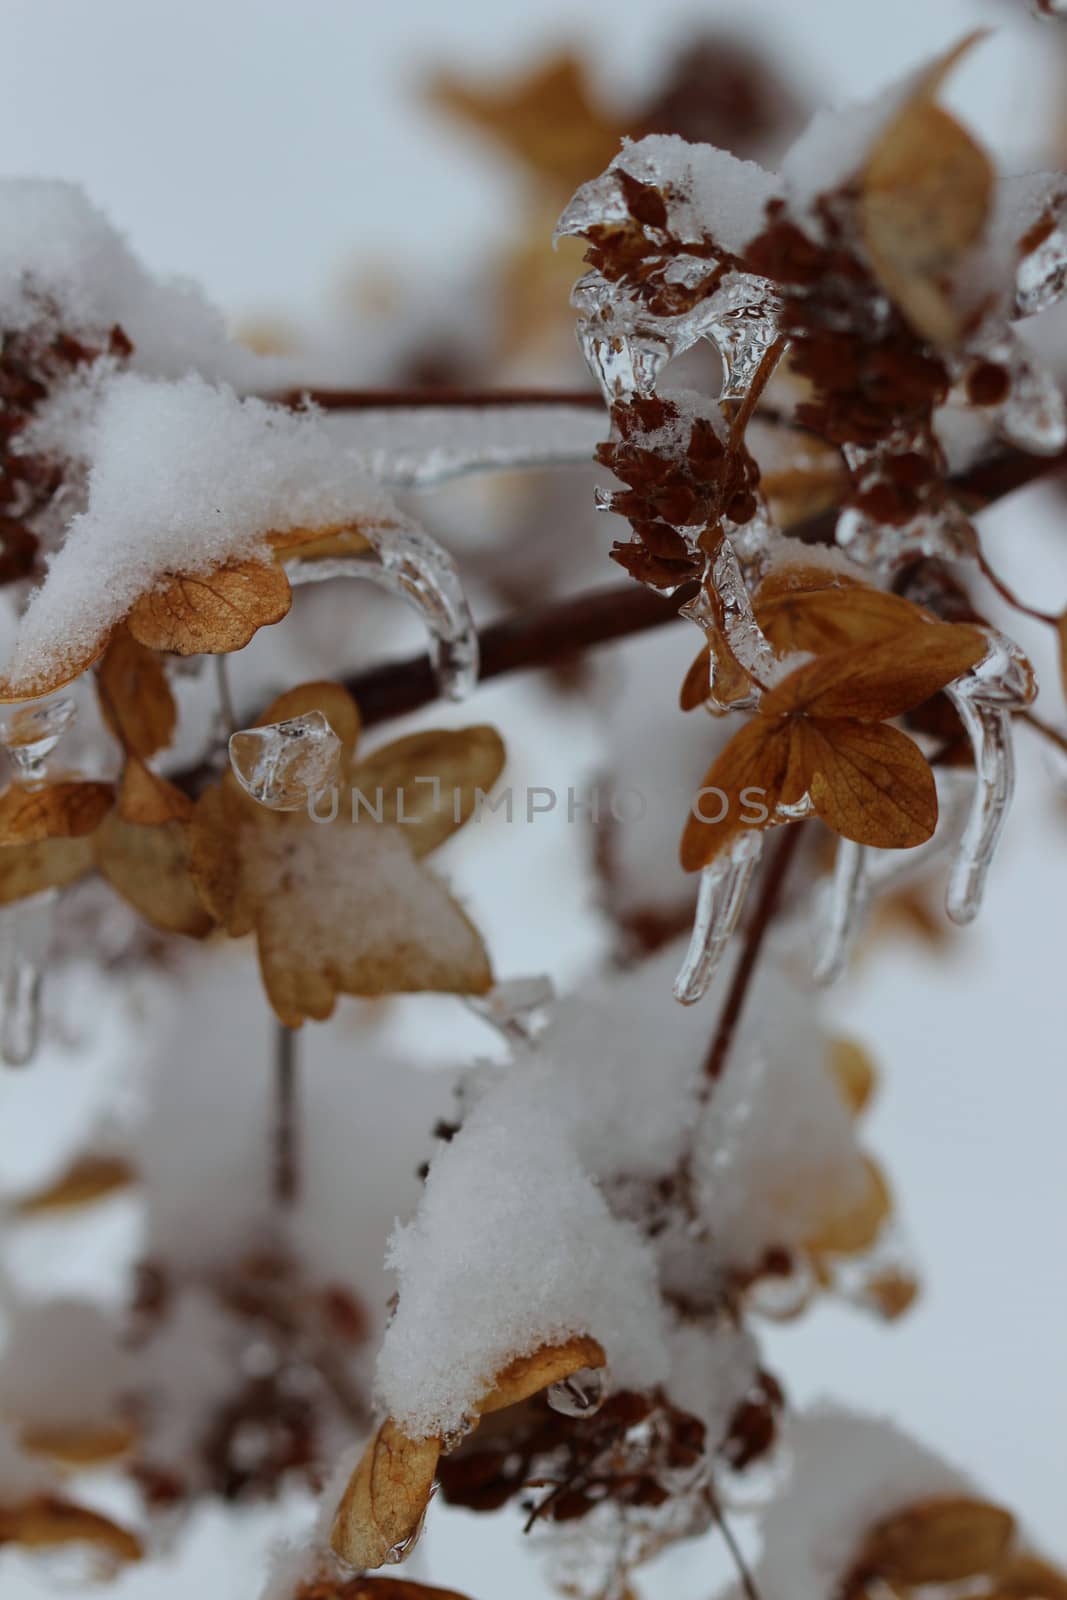 Seed pods on a bush are covered in a layer of thick ice after an ice storm in Michigan.